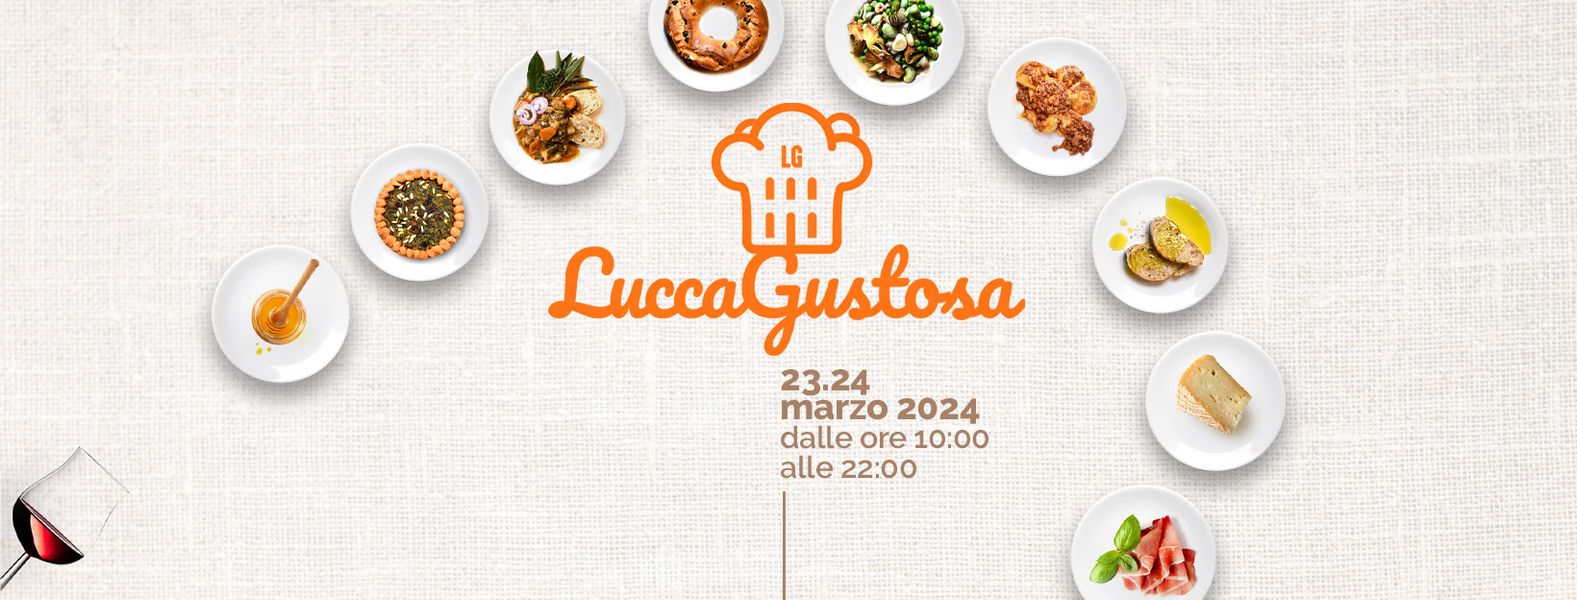 Logo Lucca Gustosa